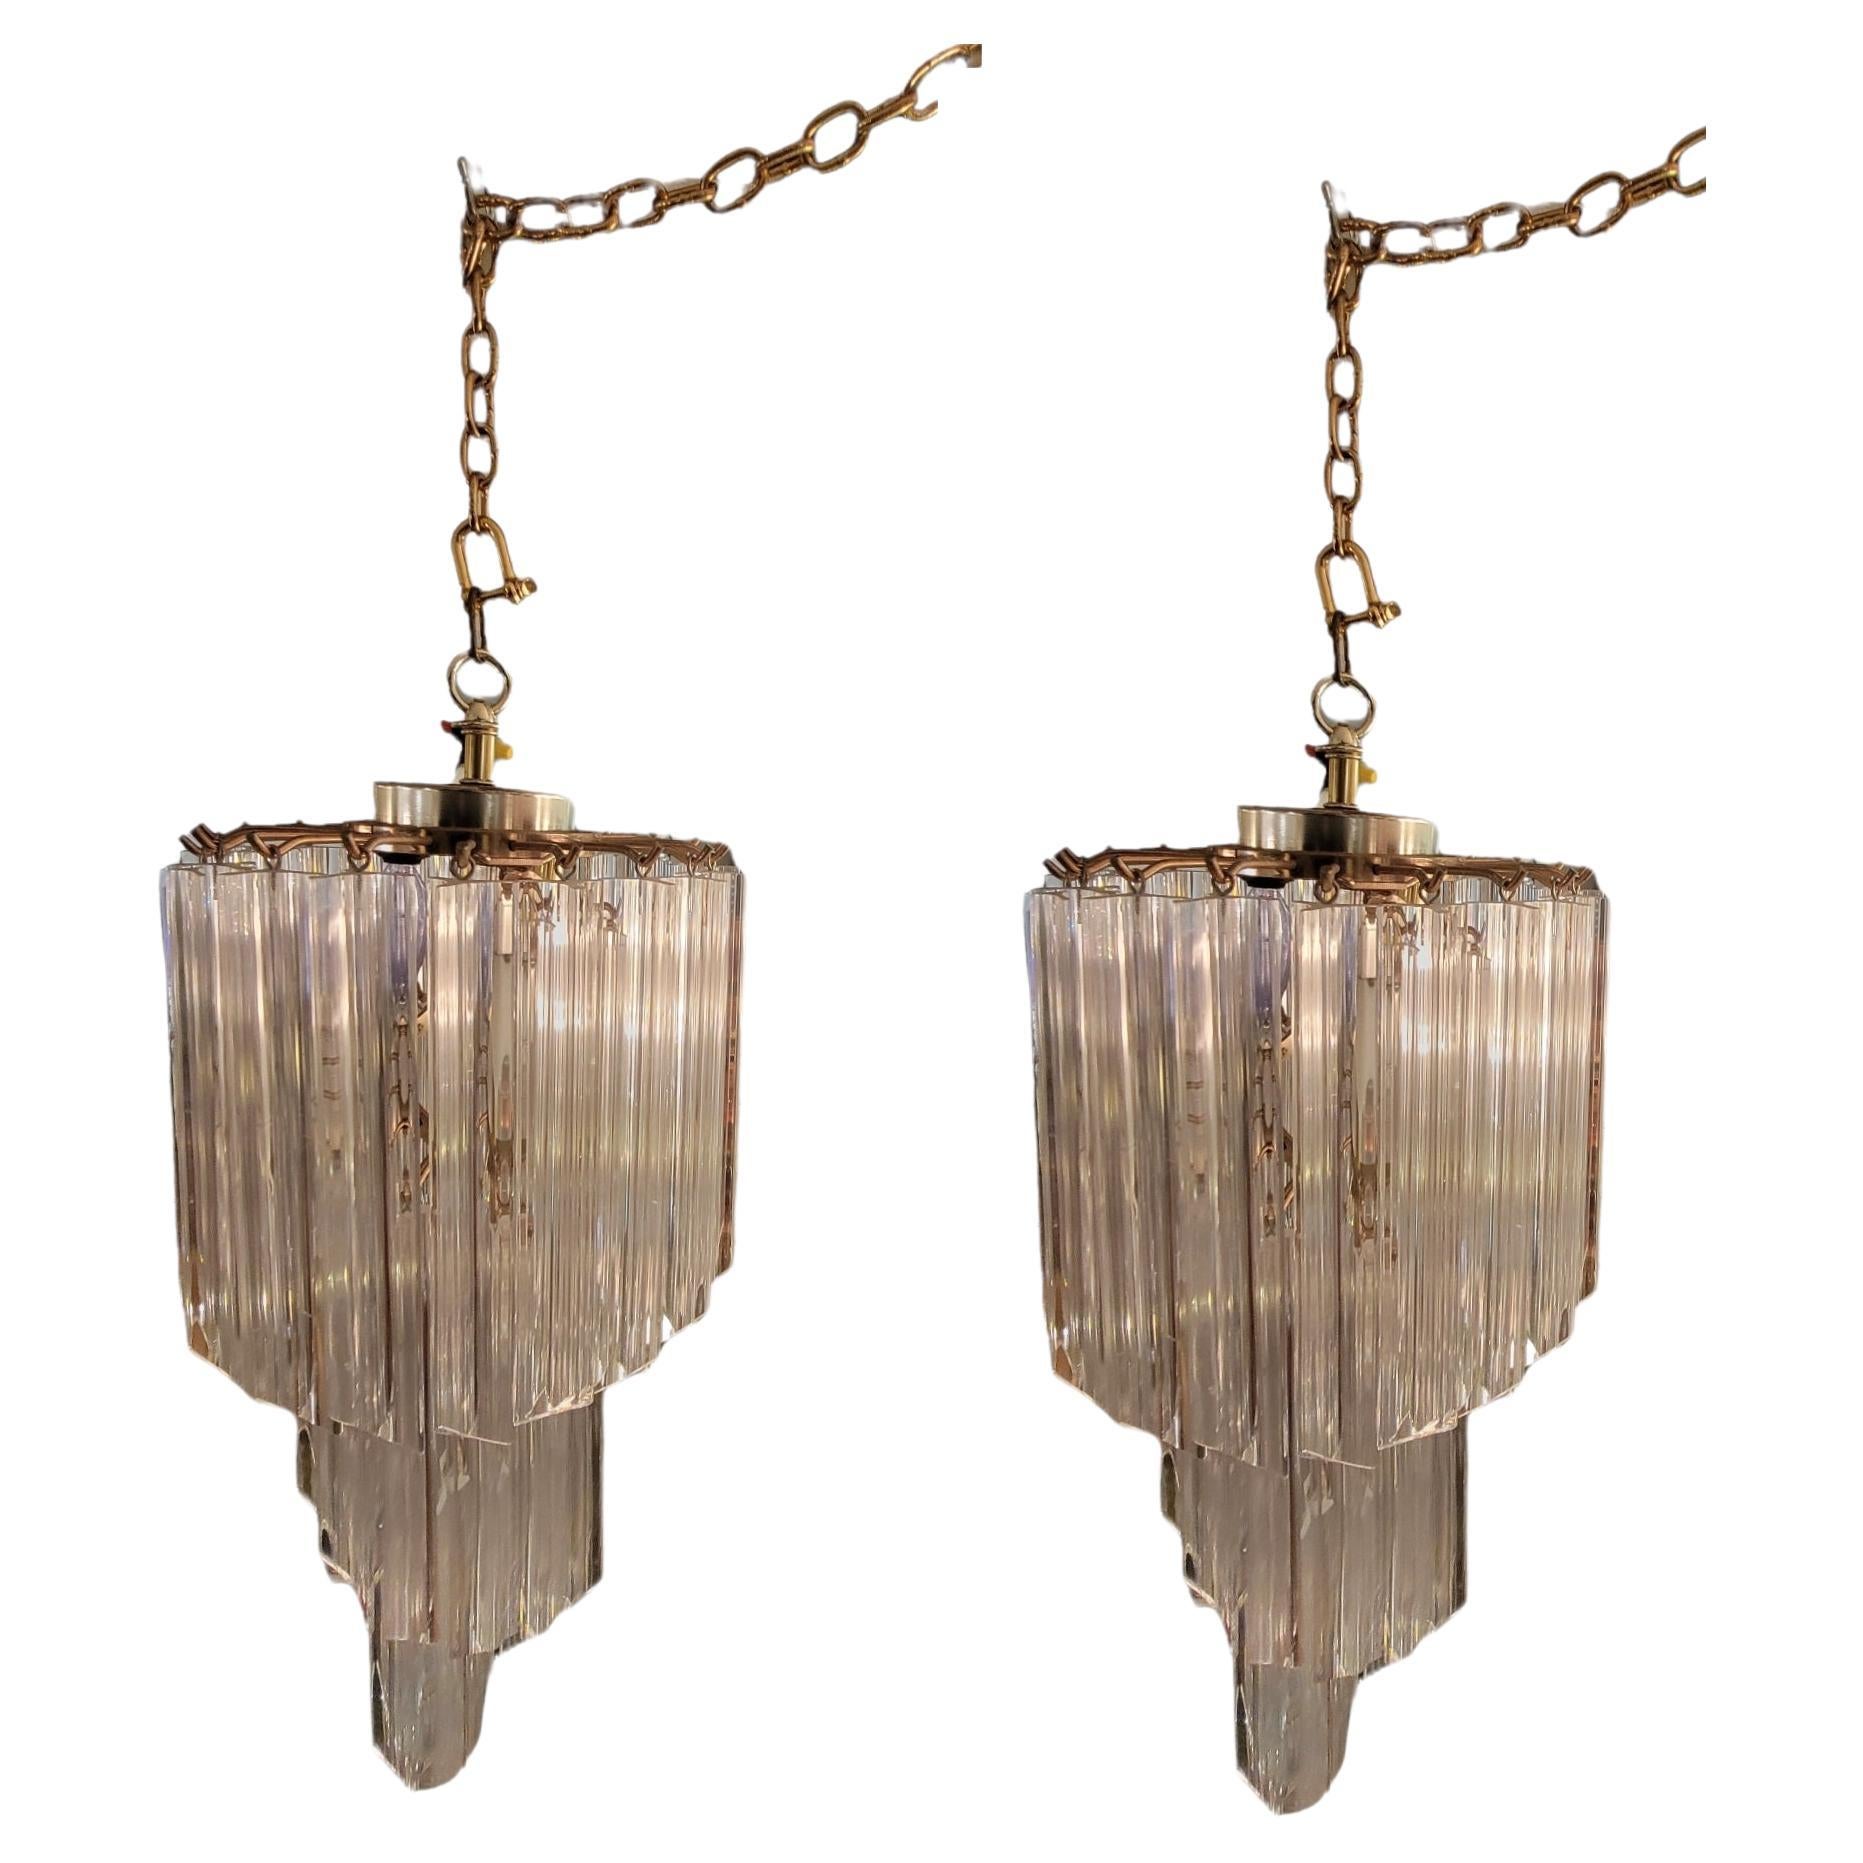 1970s Mid-Century Modern Lucite Swirl Waterfall Design Chandeliers, a Pair For Sale